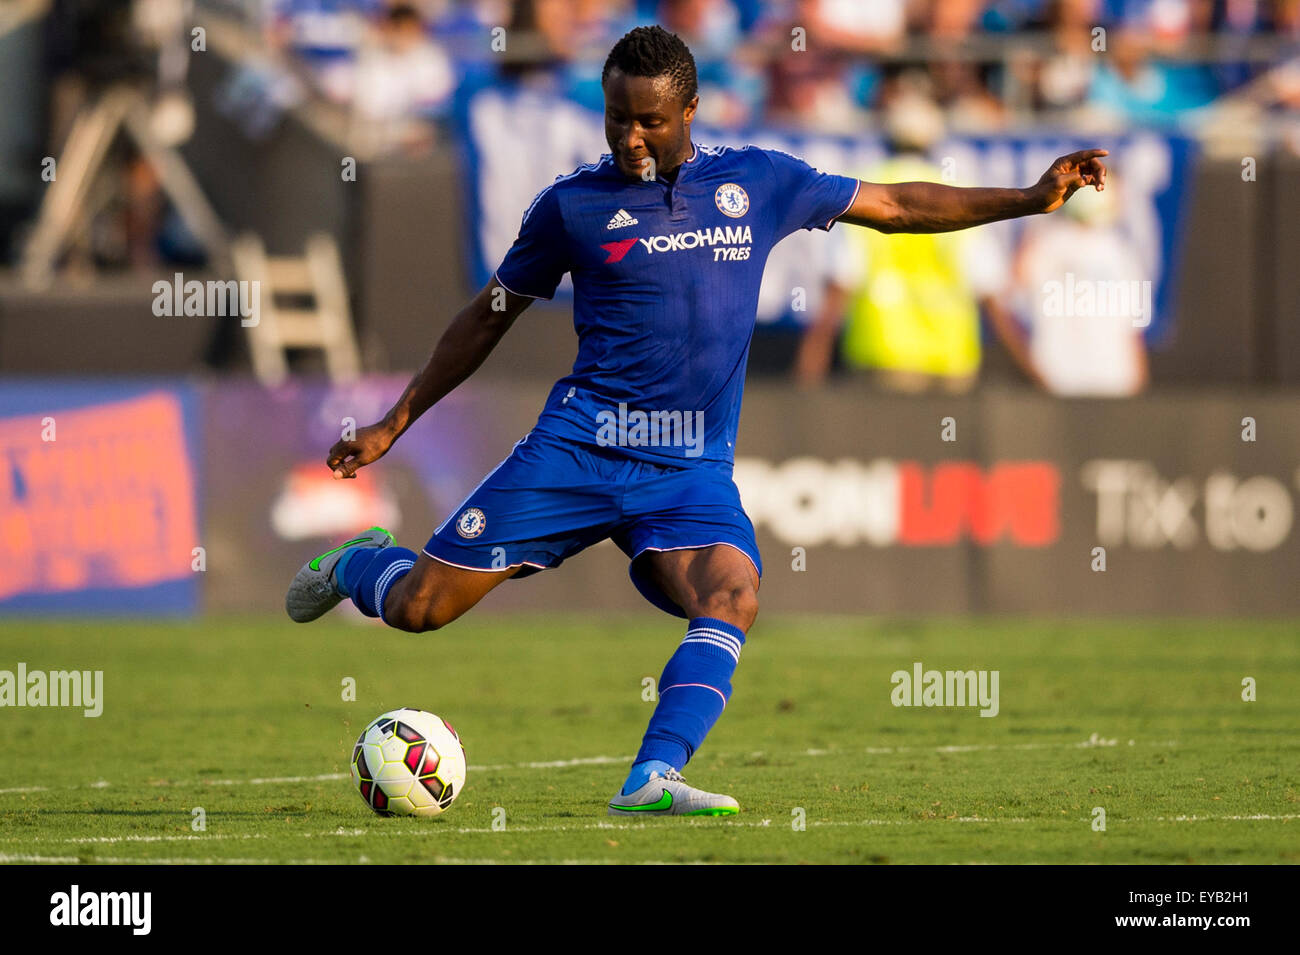 Charlotte, NC, USA. 25th July, 2015. #12 Chelsea M John Mikel Obi during the International Champions Cup match between Chelsea FC and Paris Saint-Germain at Bank of America Stadium in Charlotte, NC. Jacob Kupferman/CSM/Alamy Live News Stock Photo